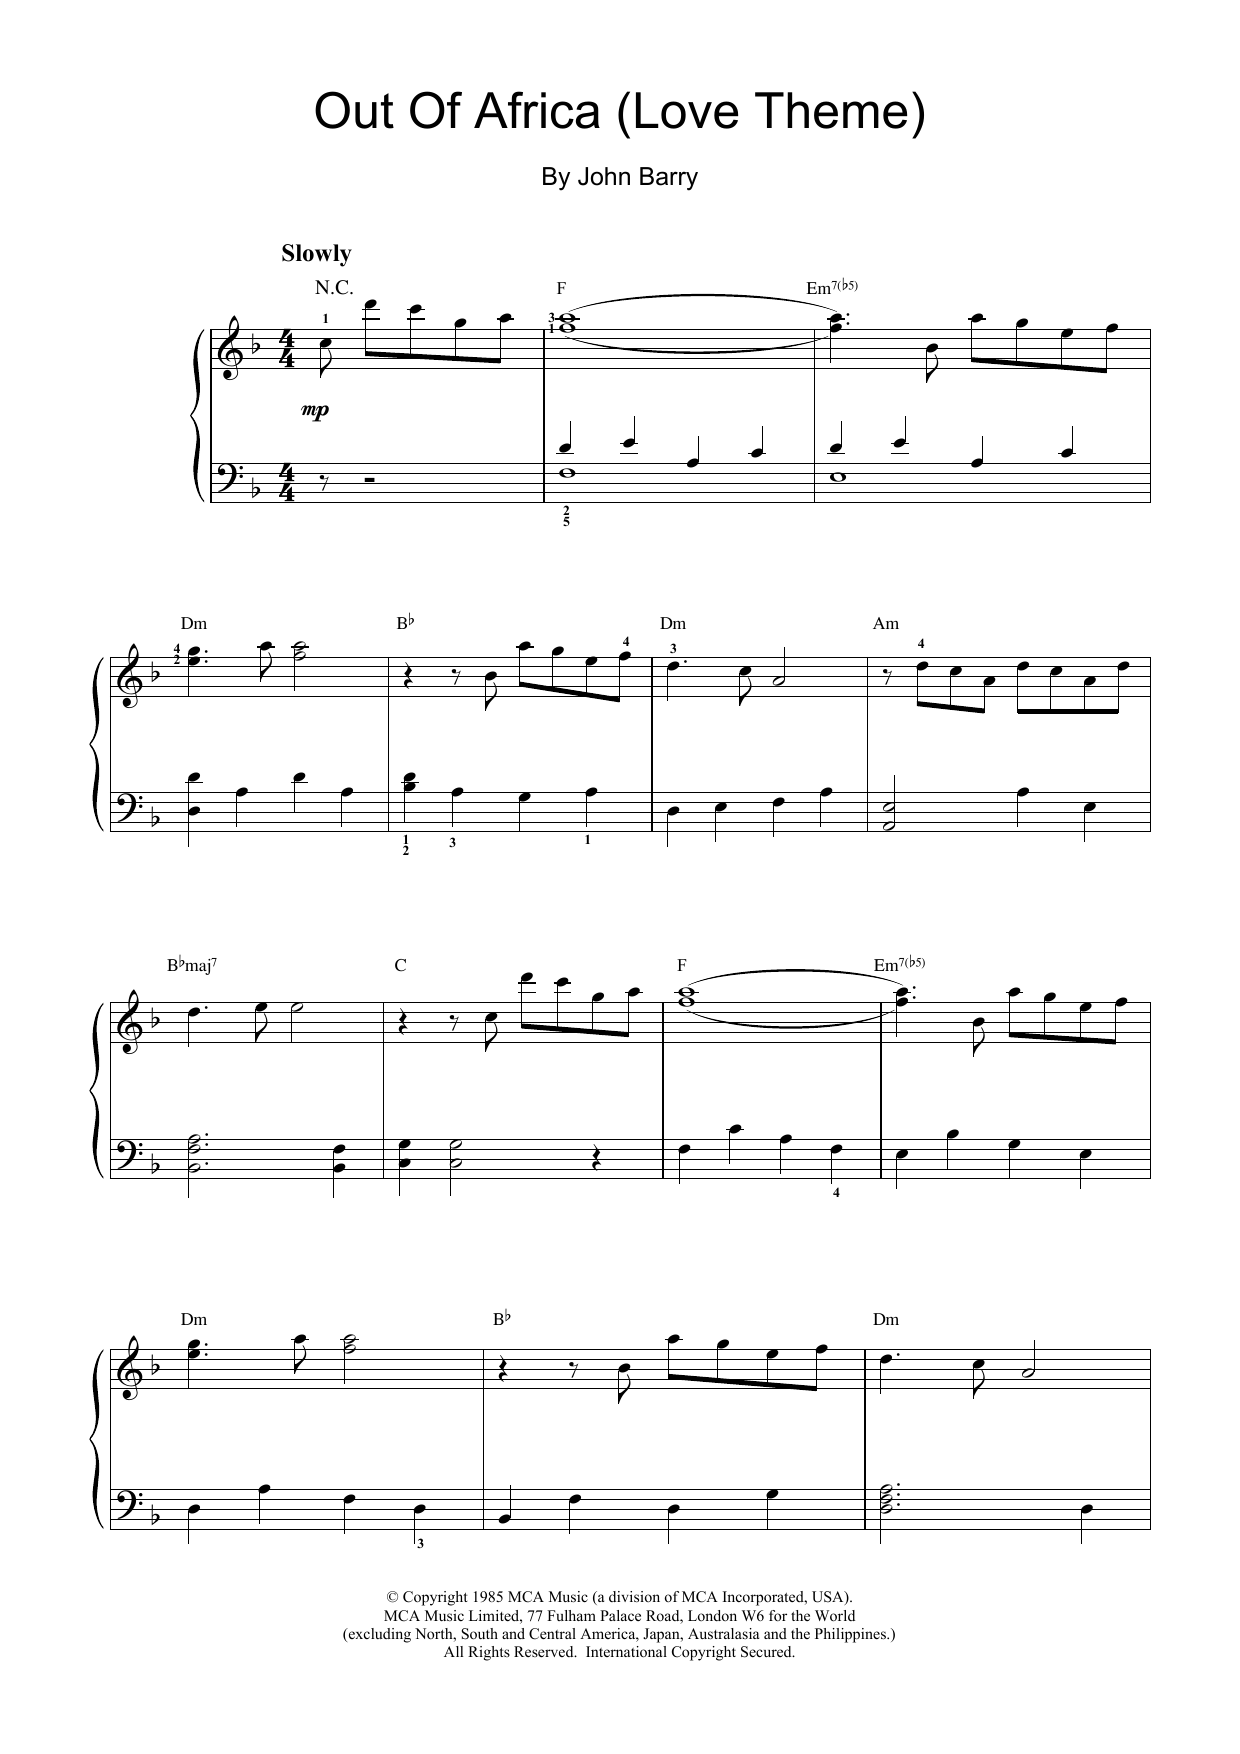 John Barry I Had A Farm In Africa (Main Title from Out Of Africa) sheet music notes and chords. Download Printable PDF.